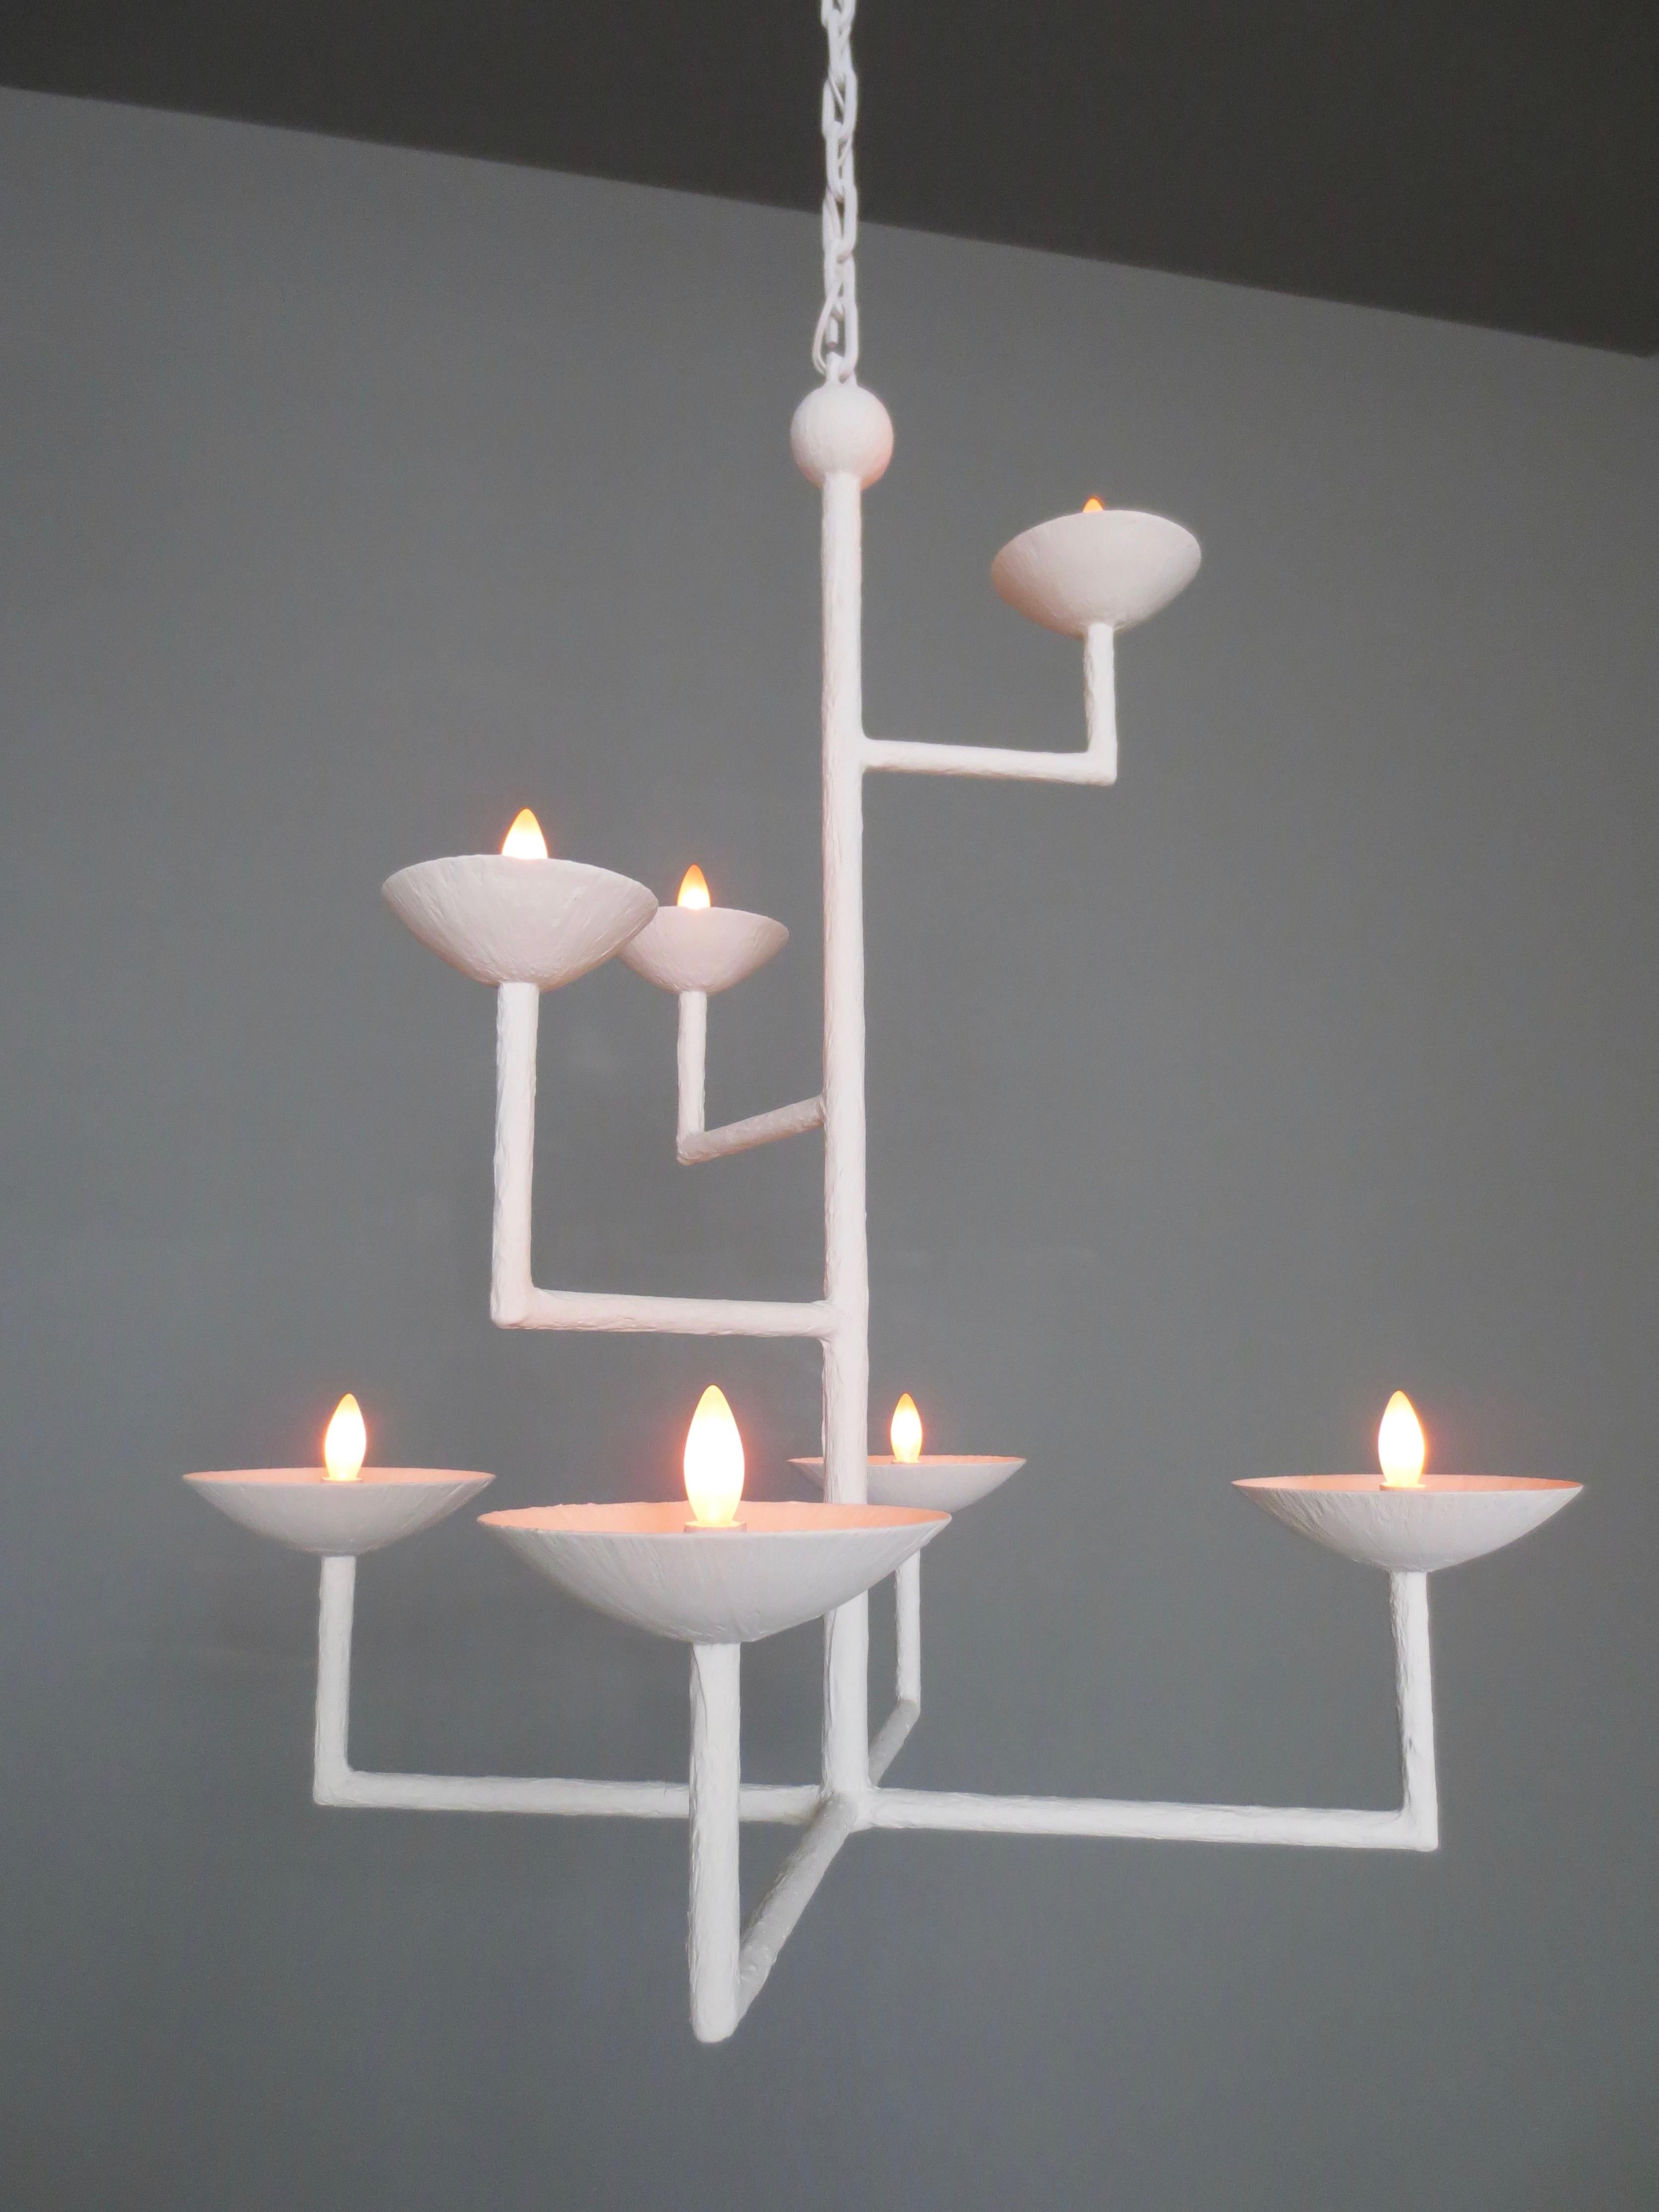 7 Cup Square Plaster Chandelier with Ball and Chain by Tracey Garet of Apsara Interior Design.
The 7 Cups of this chandelier are on various levels and the piece shown is a white plaster.  Each cup contains 1 individual light.  The fabrication is